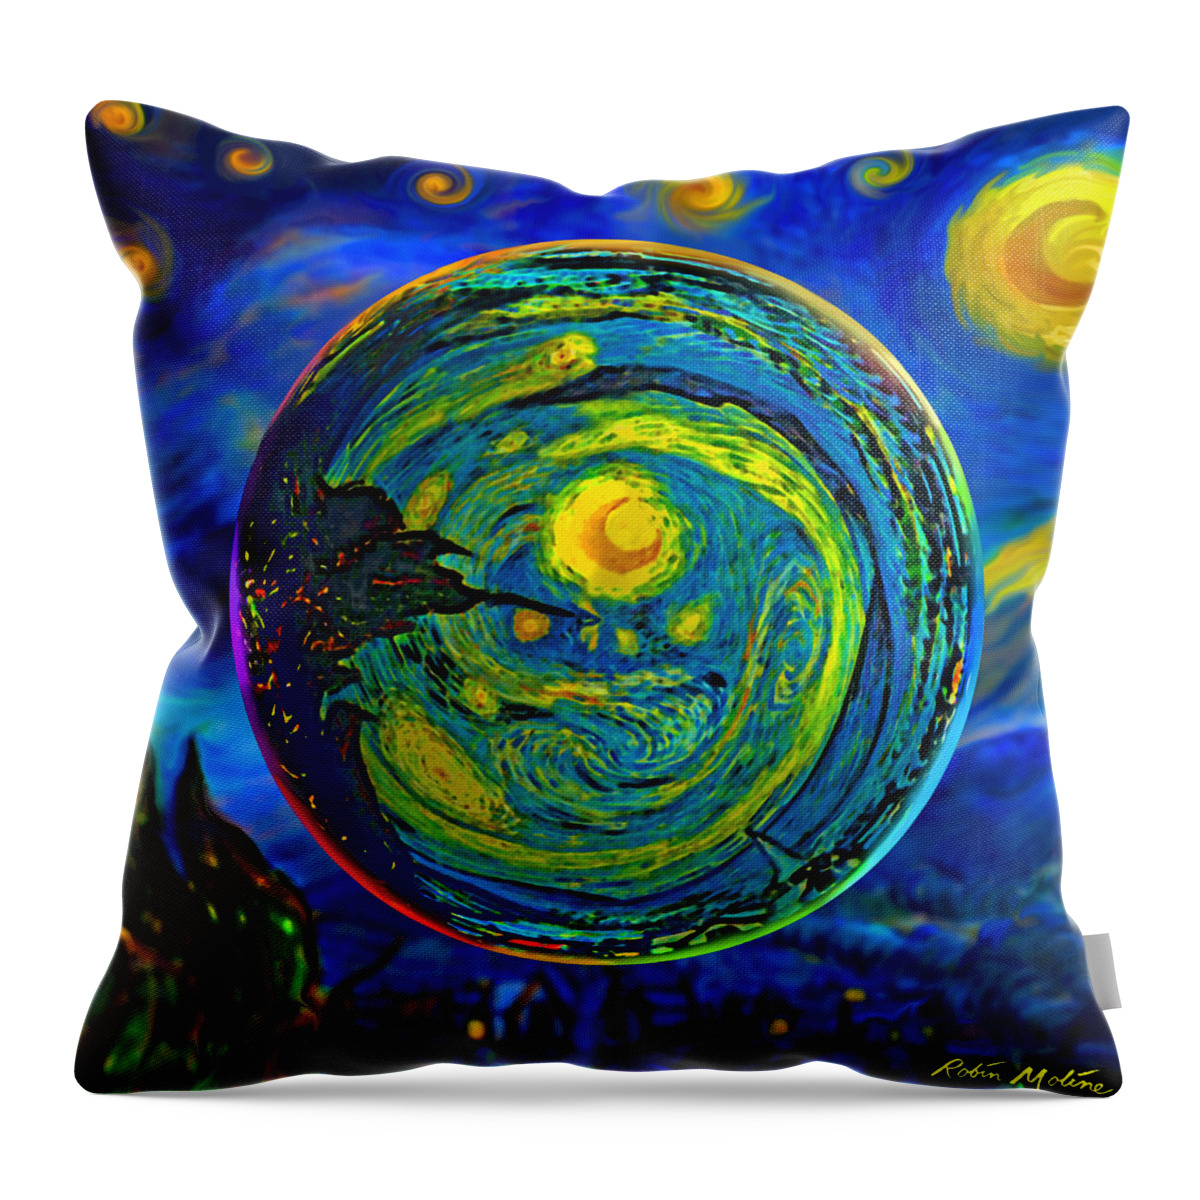 Starry Night Throw Pillow featuring the digital art Orbiting A Starry Night by Robin Moline